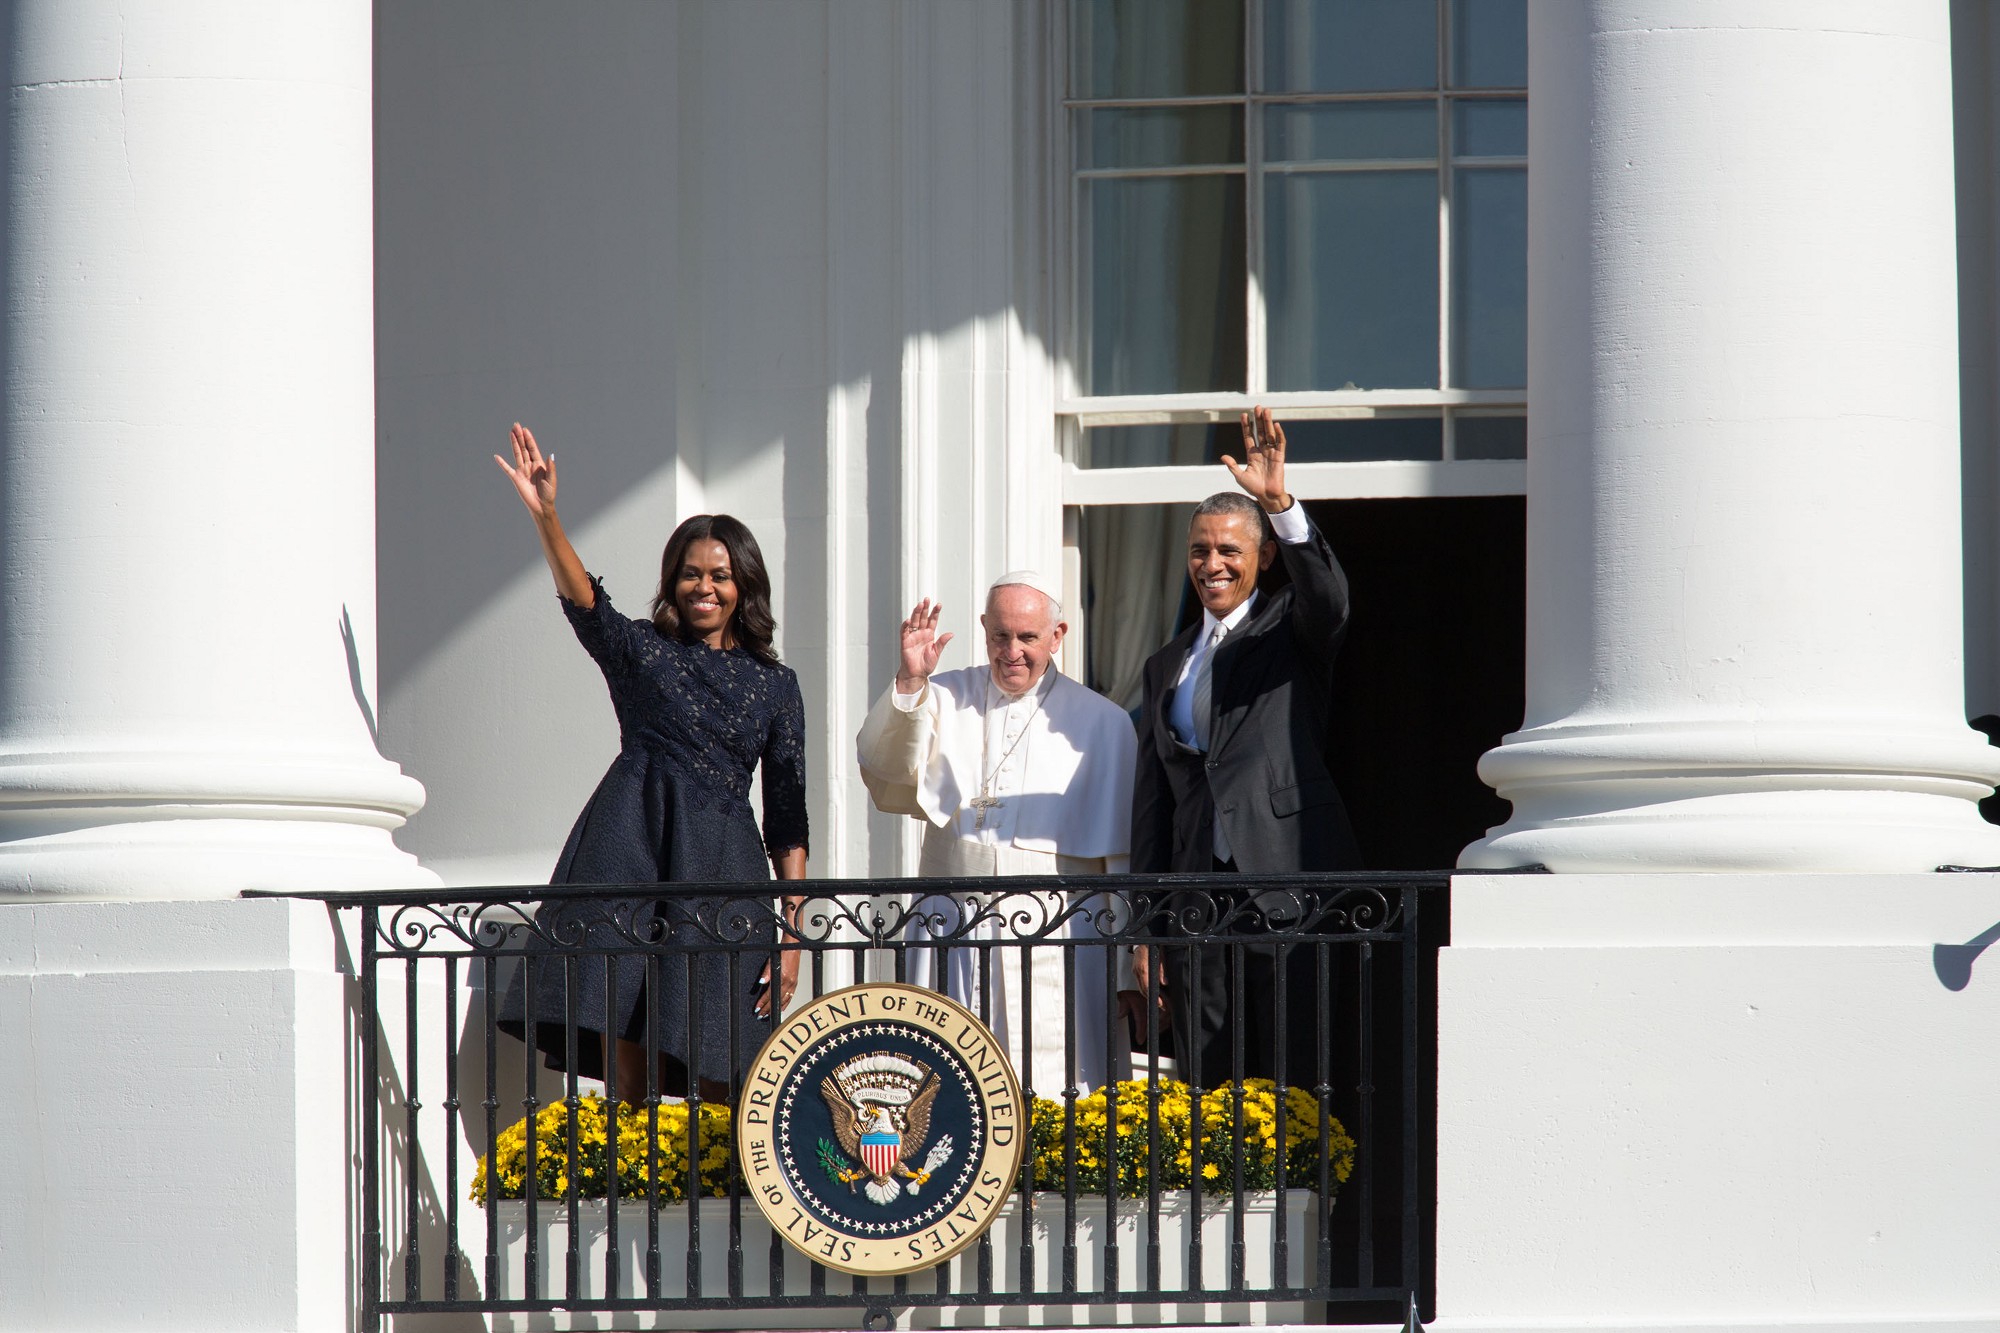 The Pope waves from the Blue Room Balcony with the President and First Lady. (Official White House Photo by Amanda Lucidon)